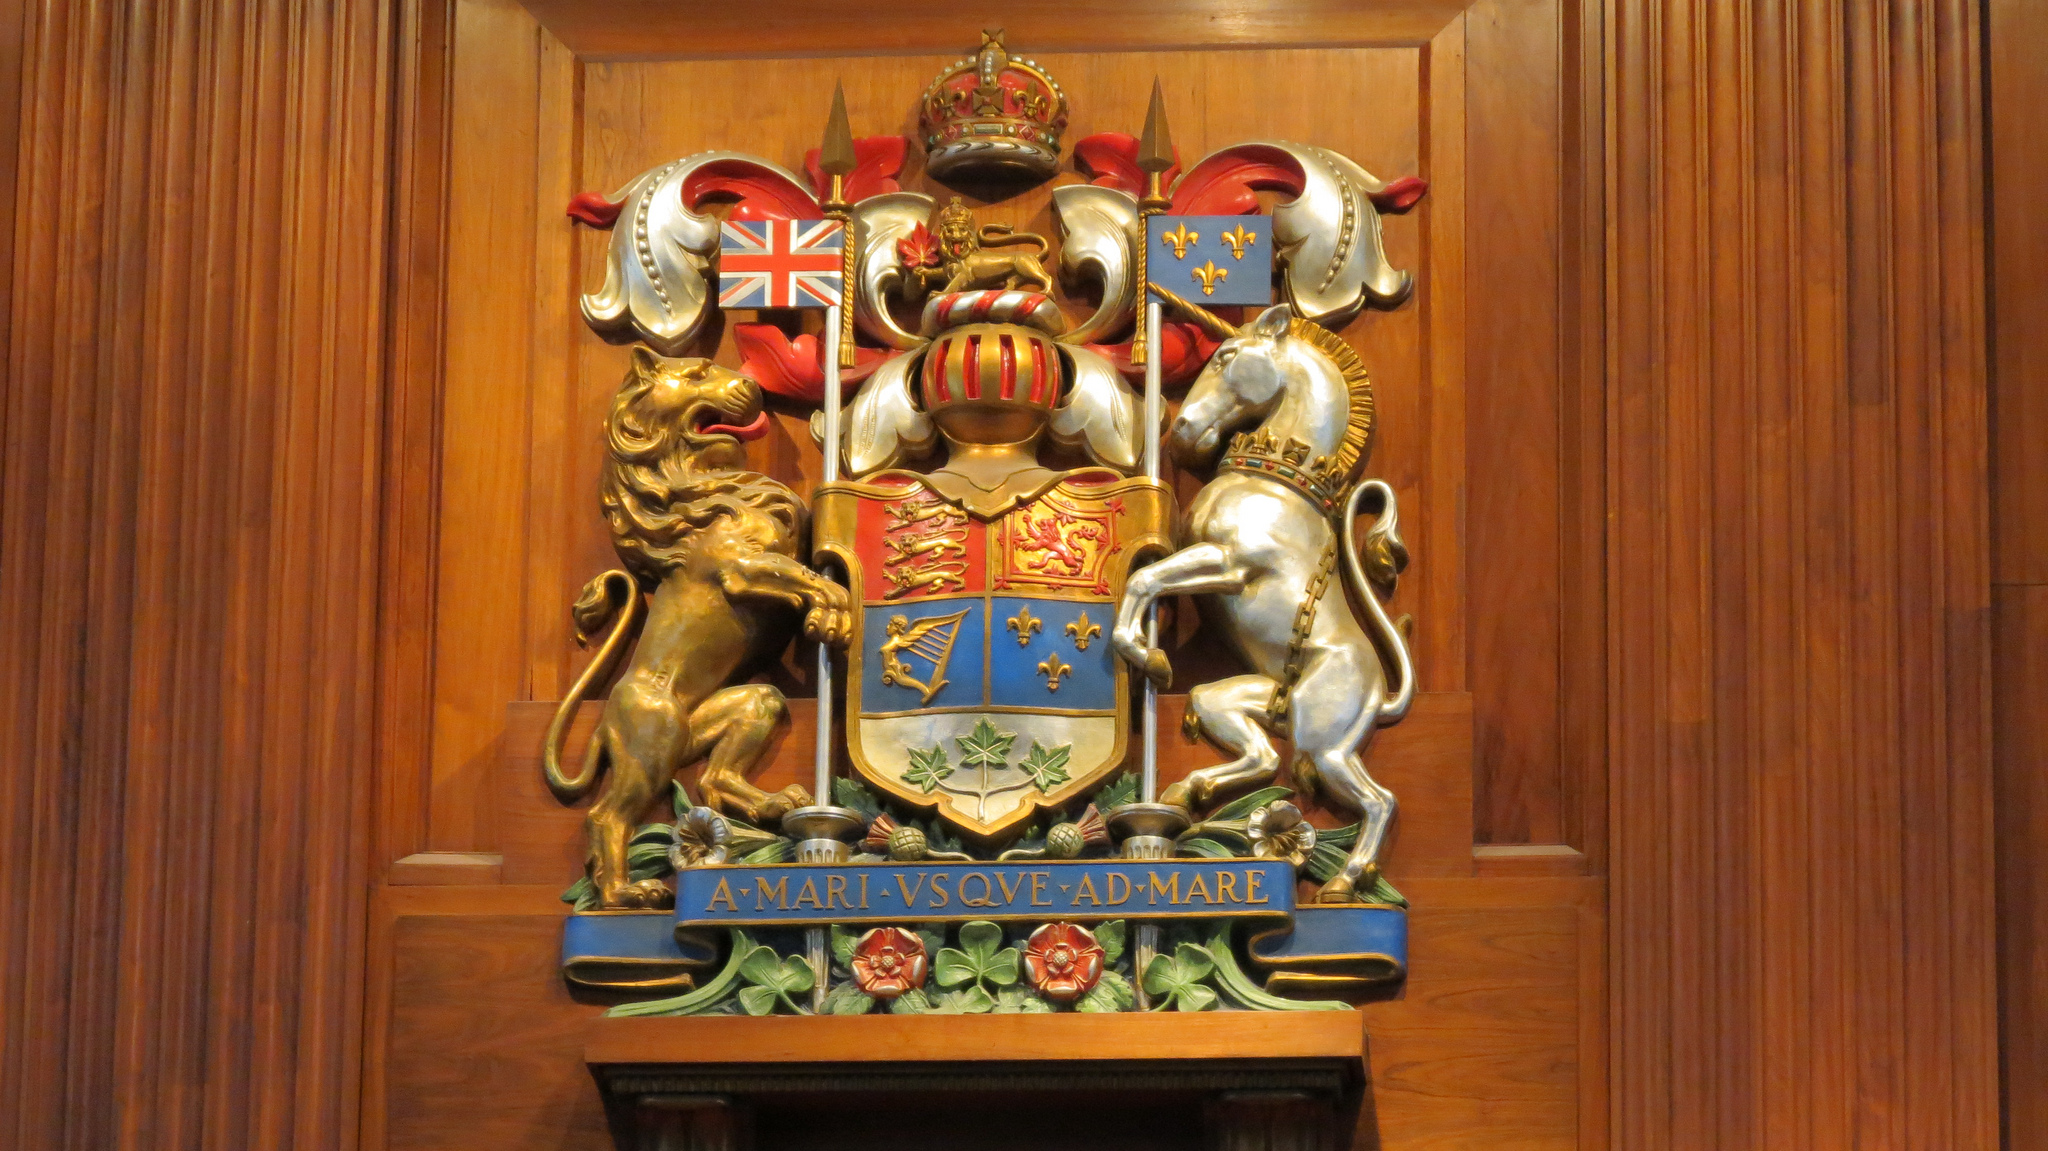 Supreme Court of Canada coat of arms with lion and unicorn